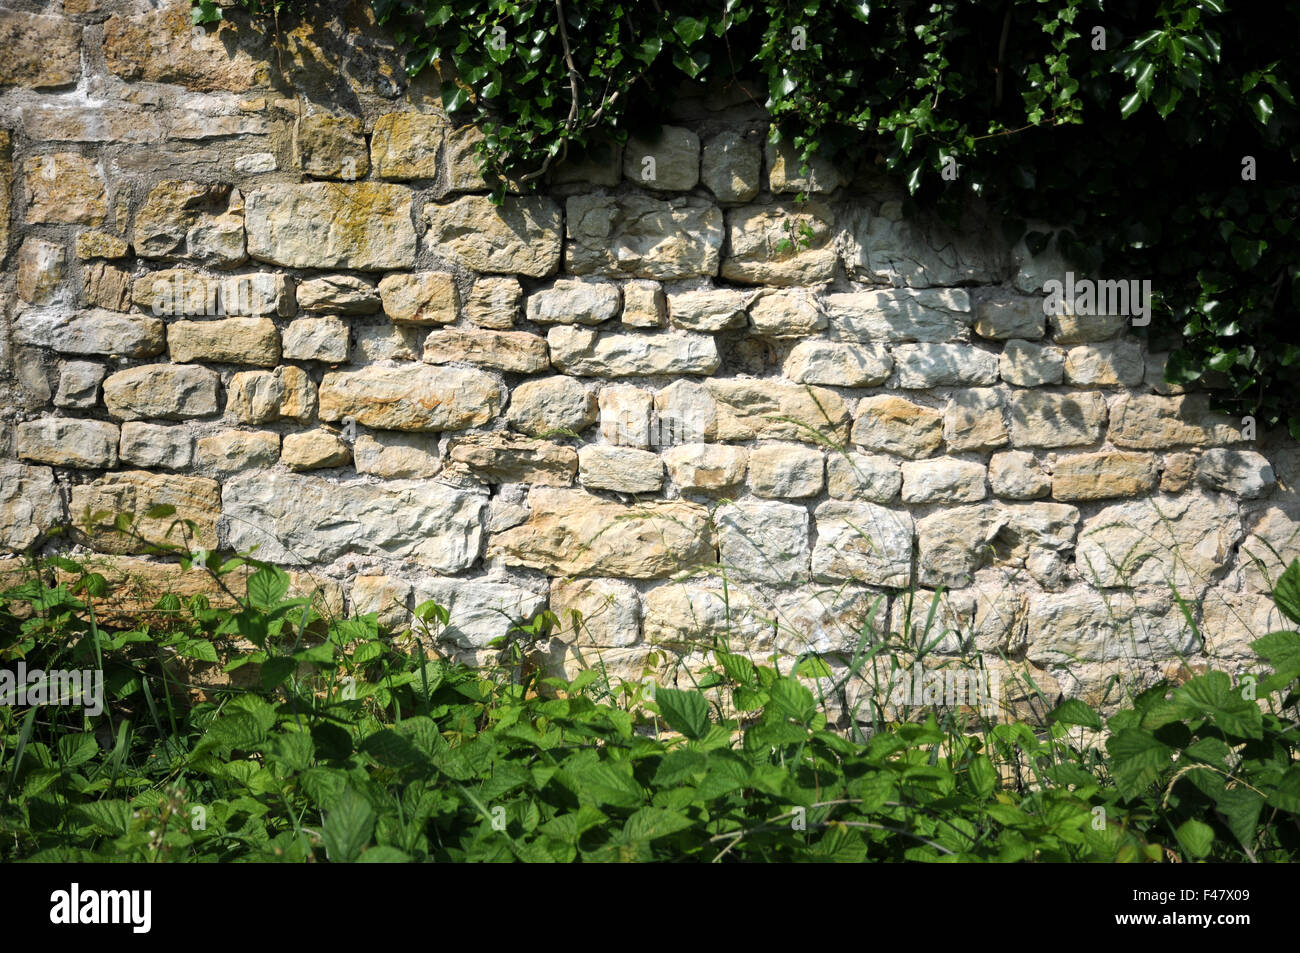 Lime-stone wall Stock Photo